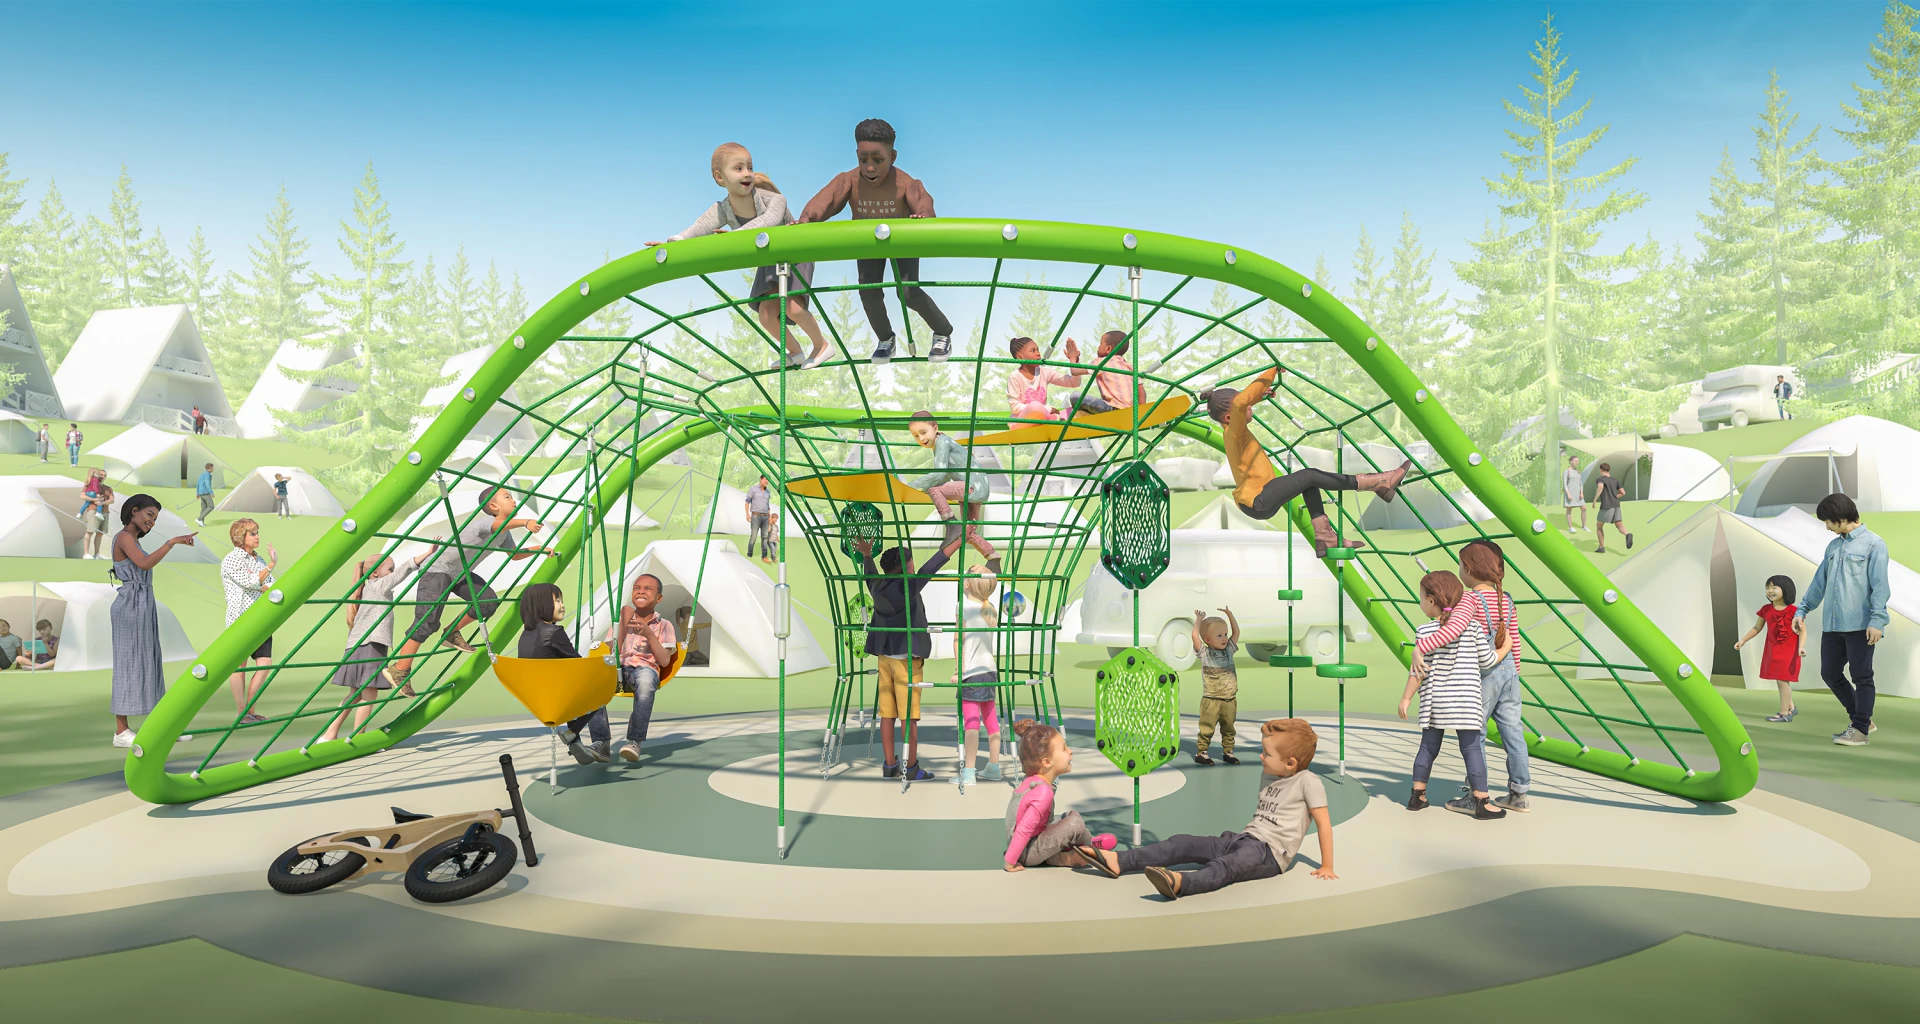 Design Rendering of children playing and climbing on a loop play structure